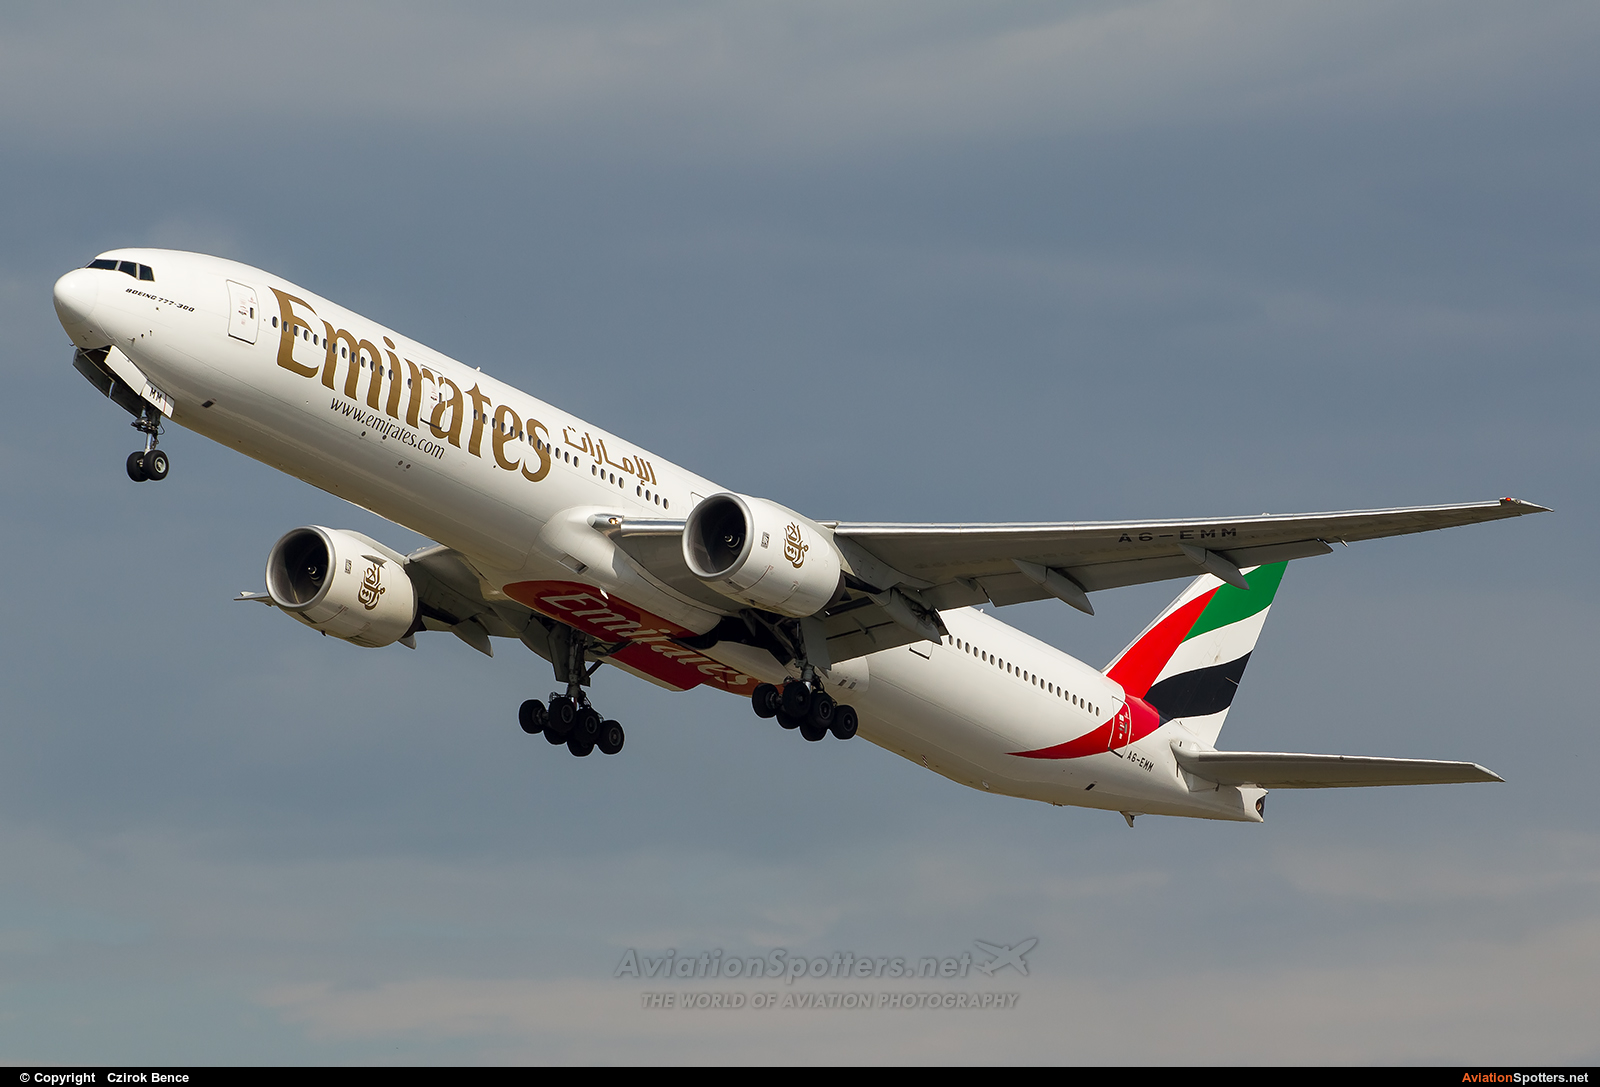 Emirates Airlines  -  777-300  (A6-EMM) By Czirok Bence (Orosmet)